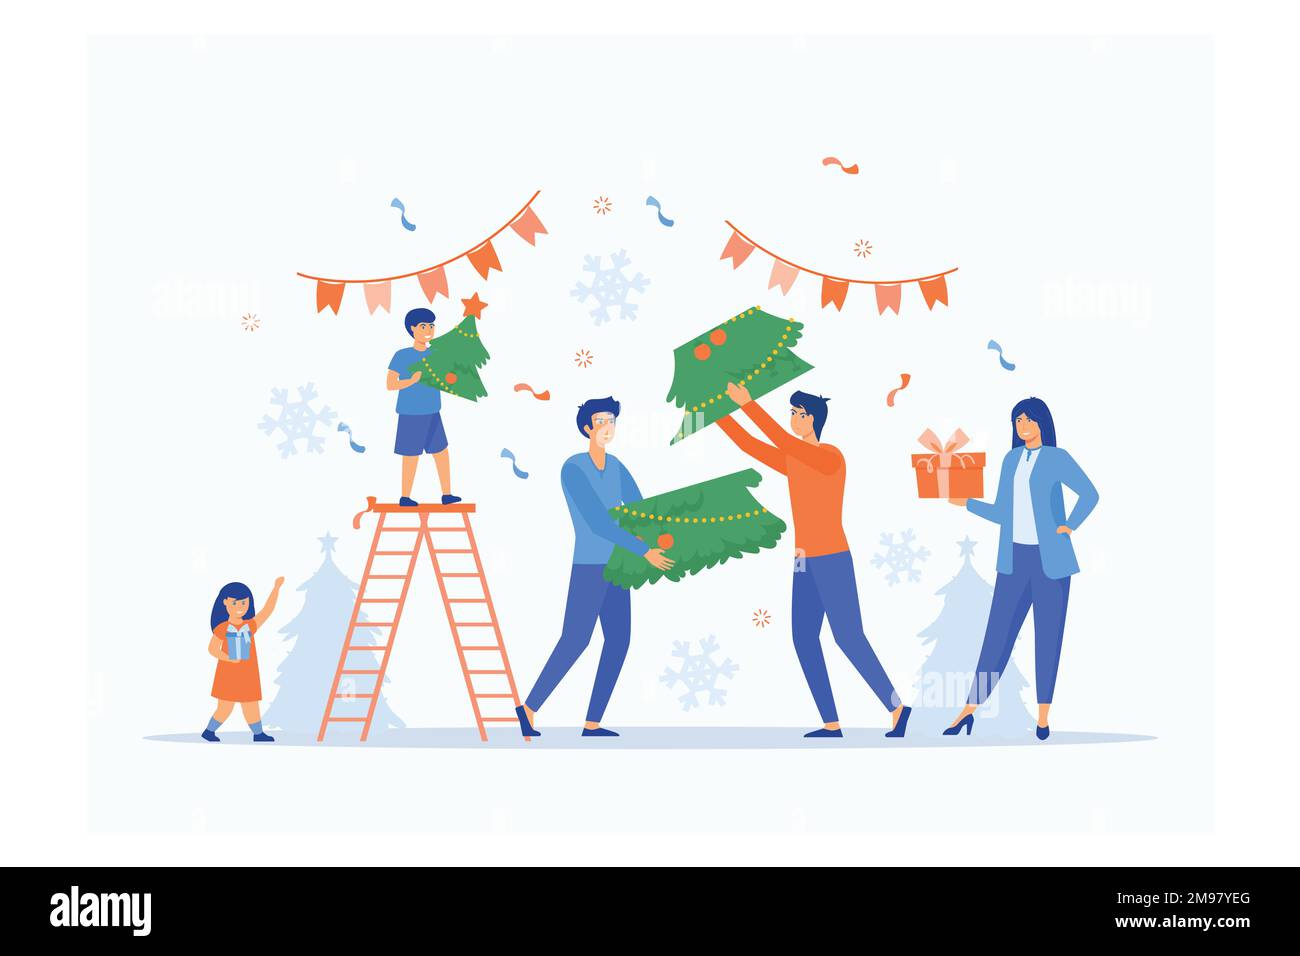 Family prepare to celebrate Christmas / New Year's Eve by making Christmas tree together, flat vector modern illustration Stock Vector